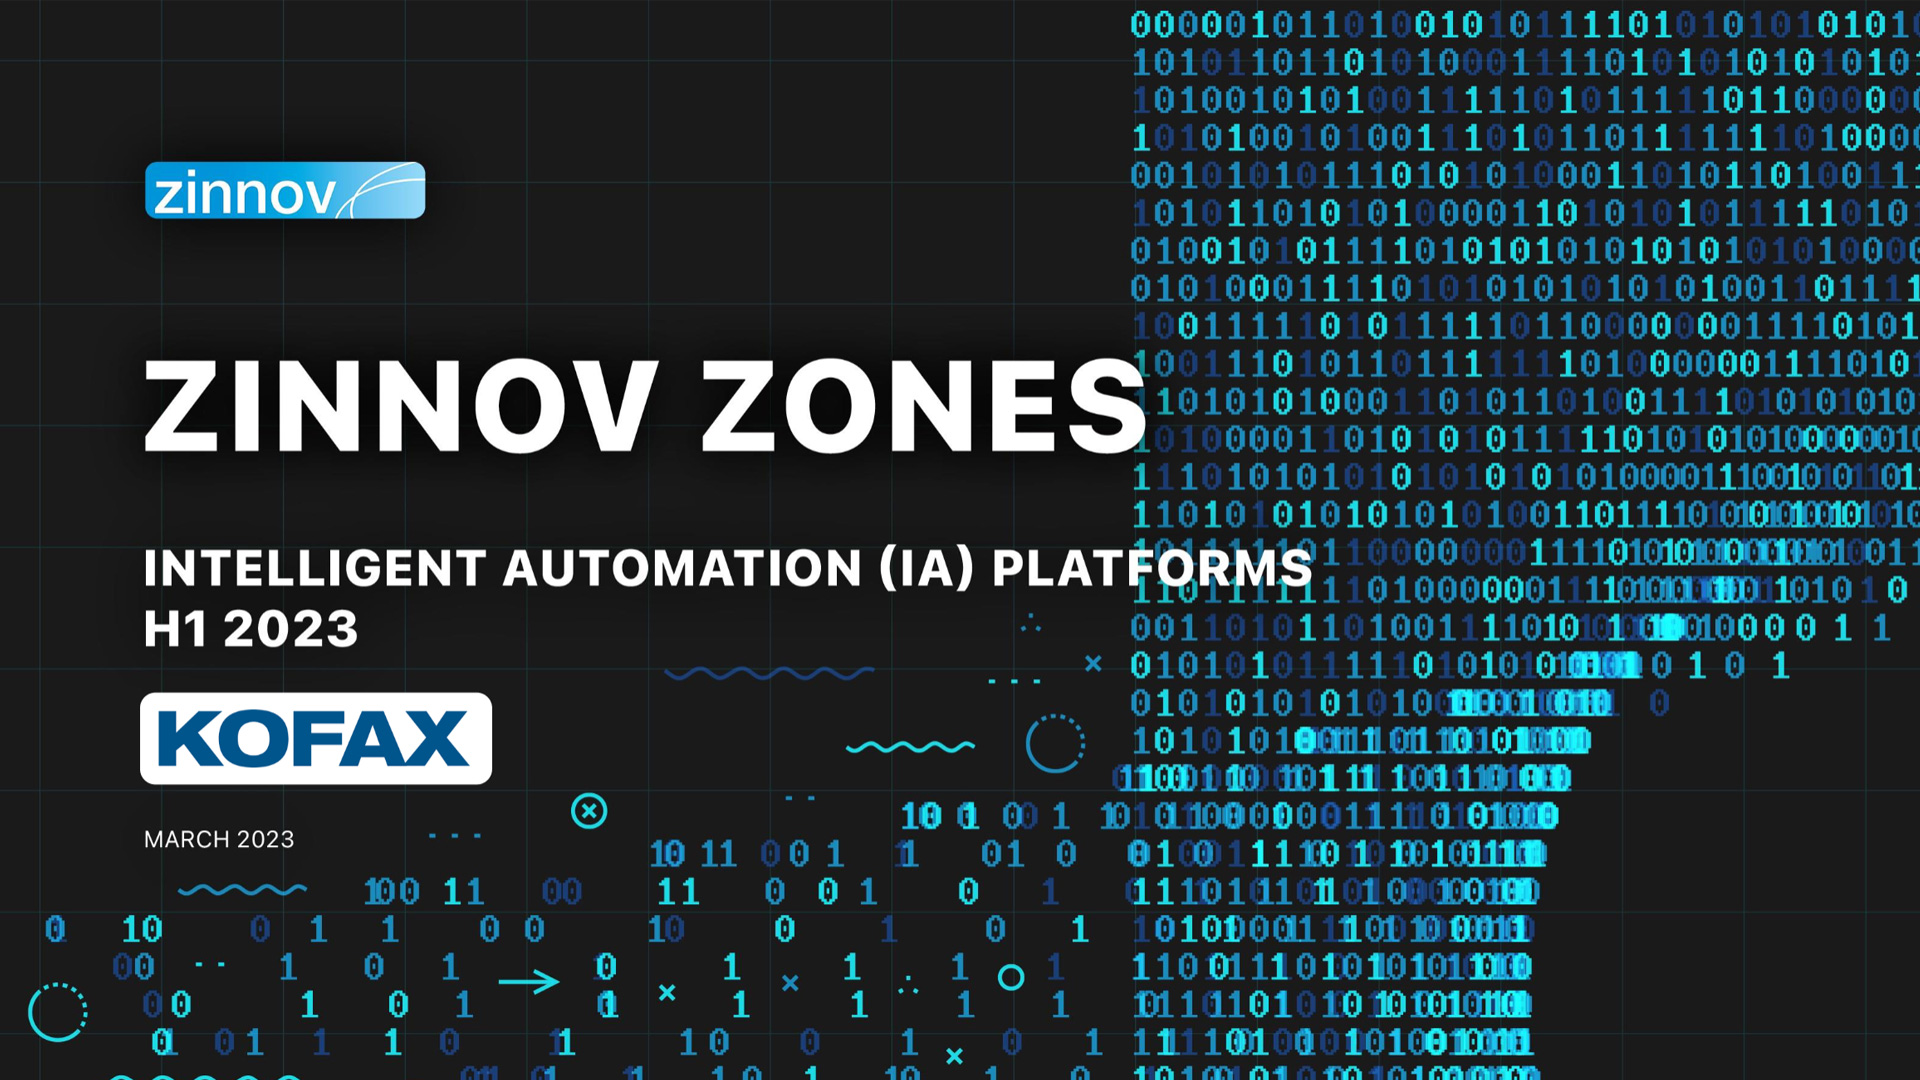 Kofax Named a Leader in Zinnov Zones Ratings for Intelligent Automation Platforms for the third year in a row